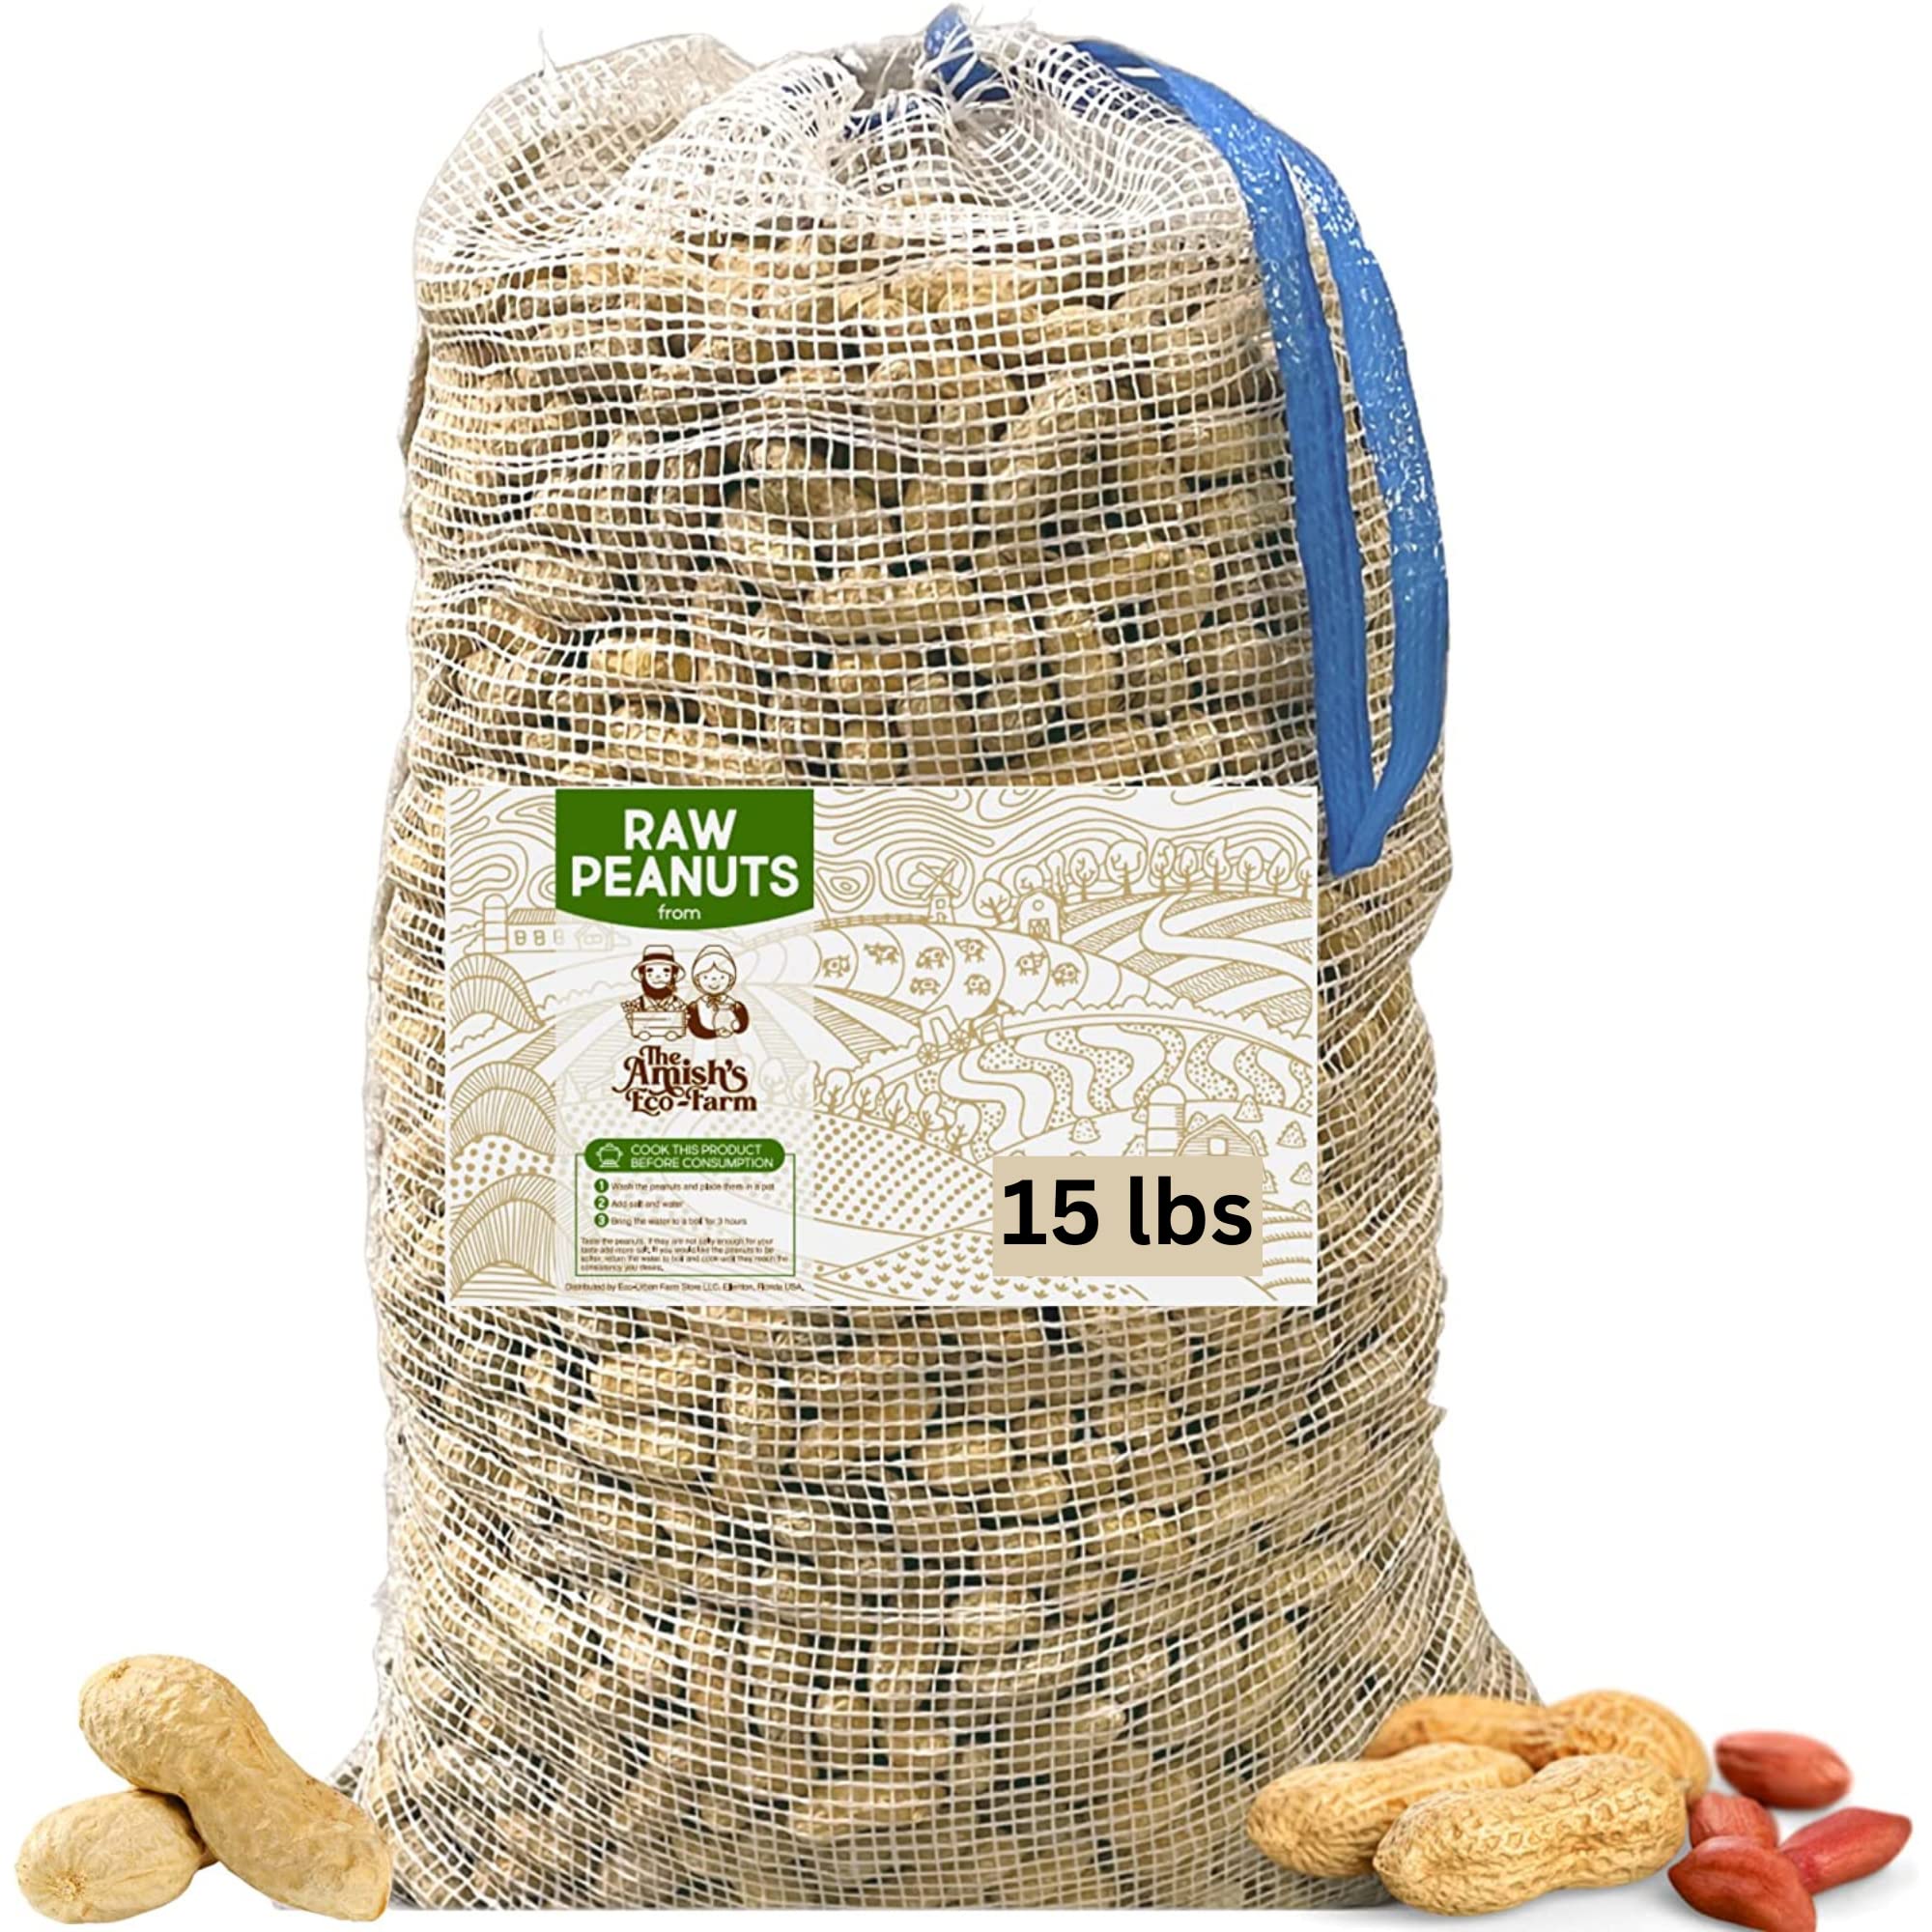 THE AMISH EcO-FARM Raw Peanuts in Shell Fancy 15 lbs. (great for Boiling Squirrels and Birds)